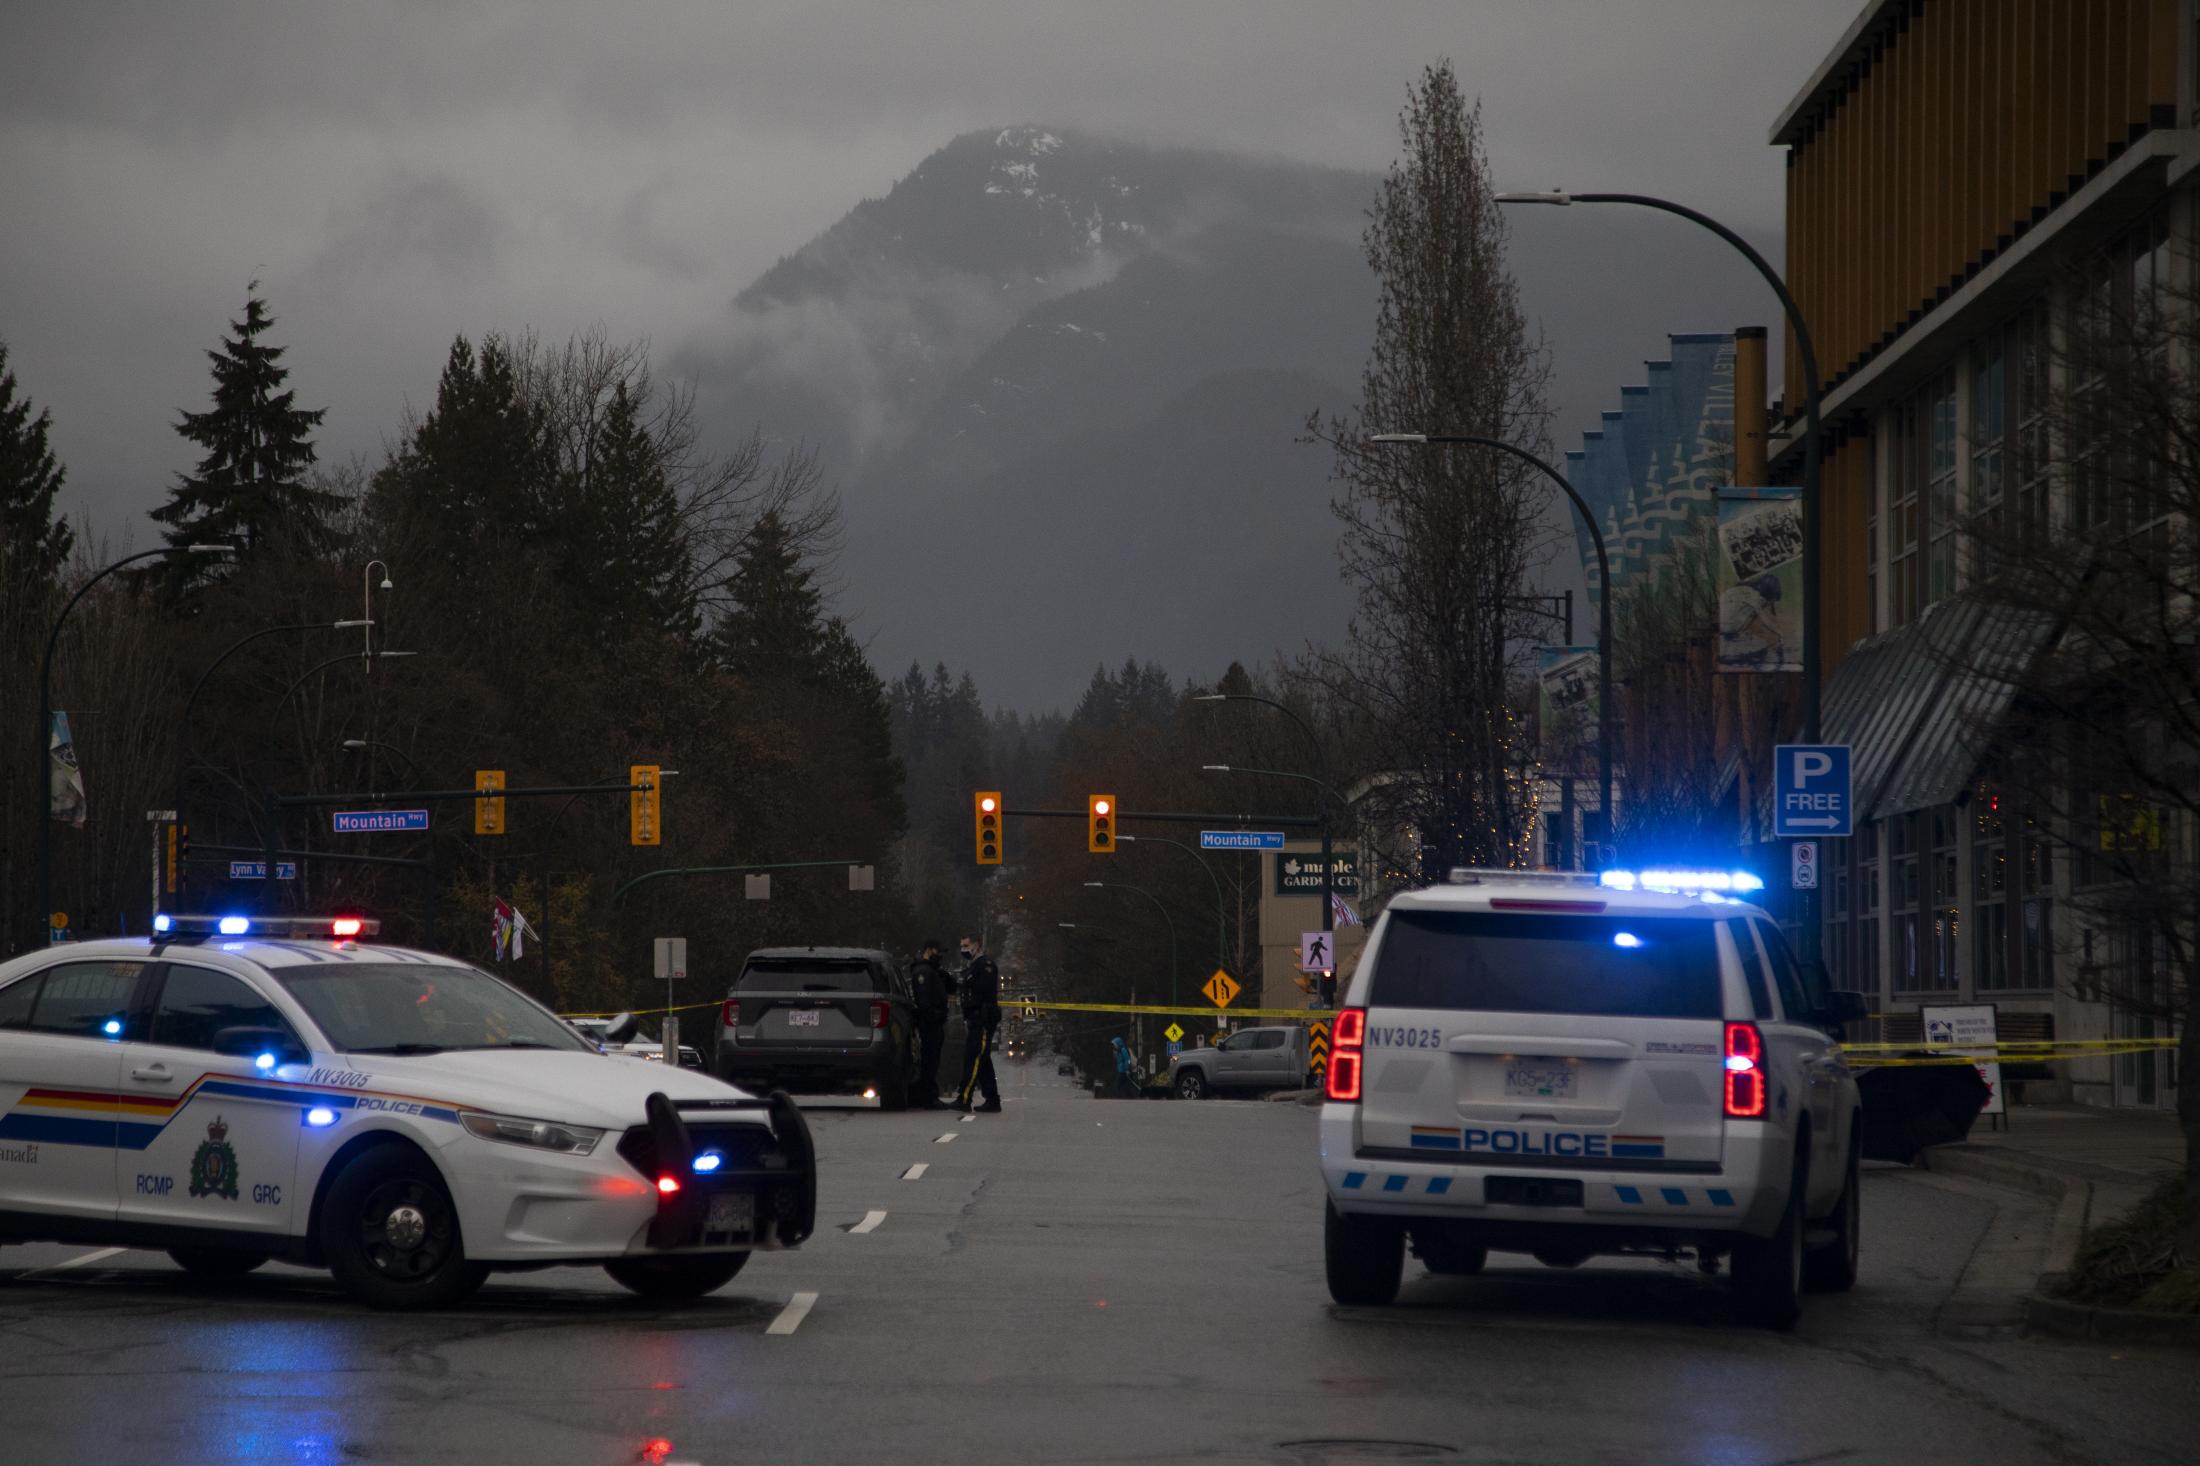 Lynn Valley Stabbings - A woman was killed and six hospitalized after a suspect...